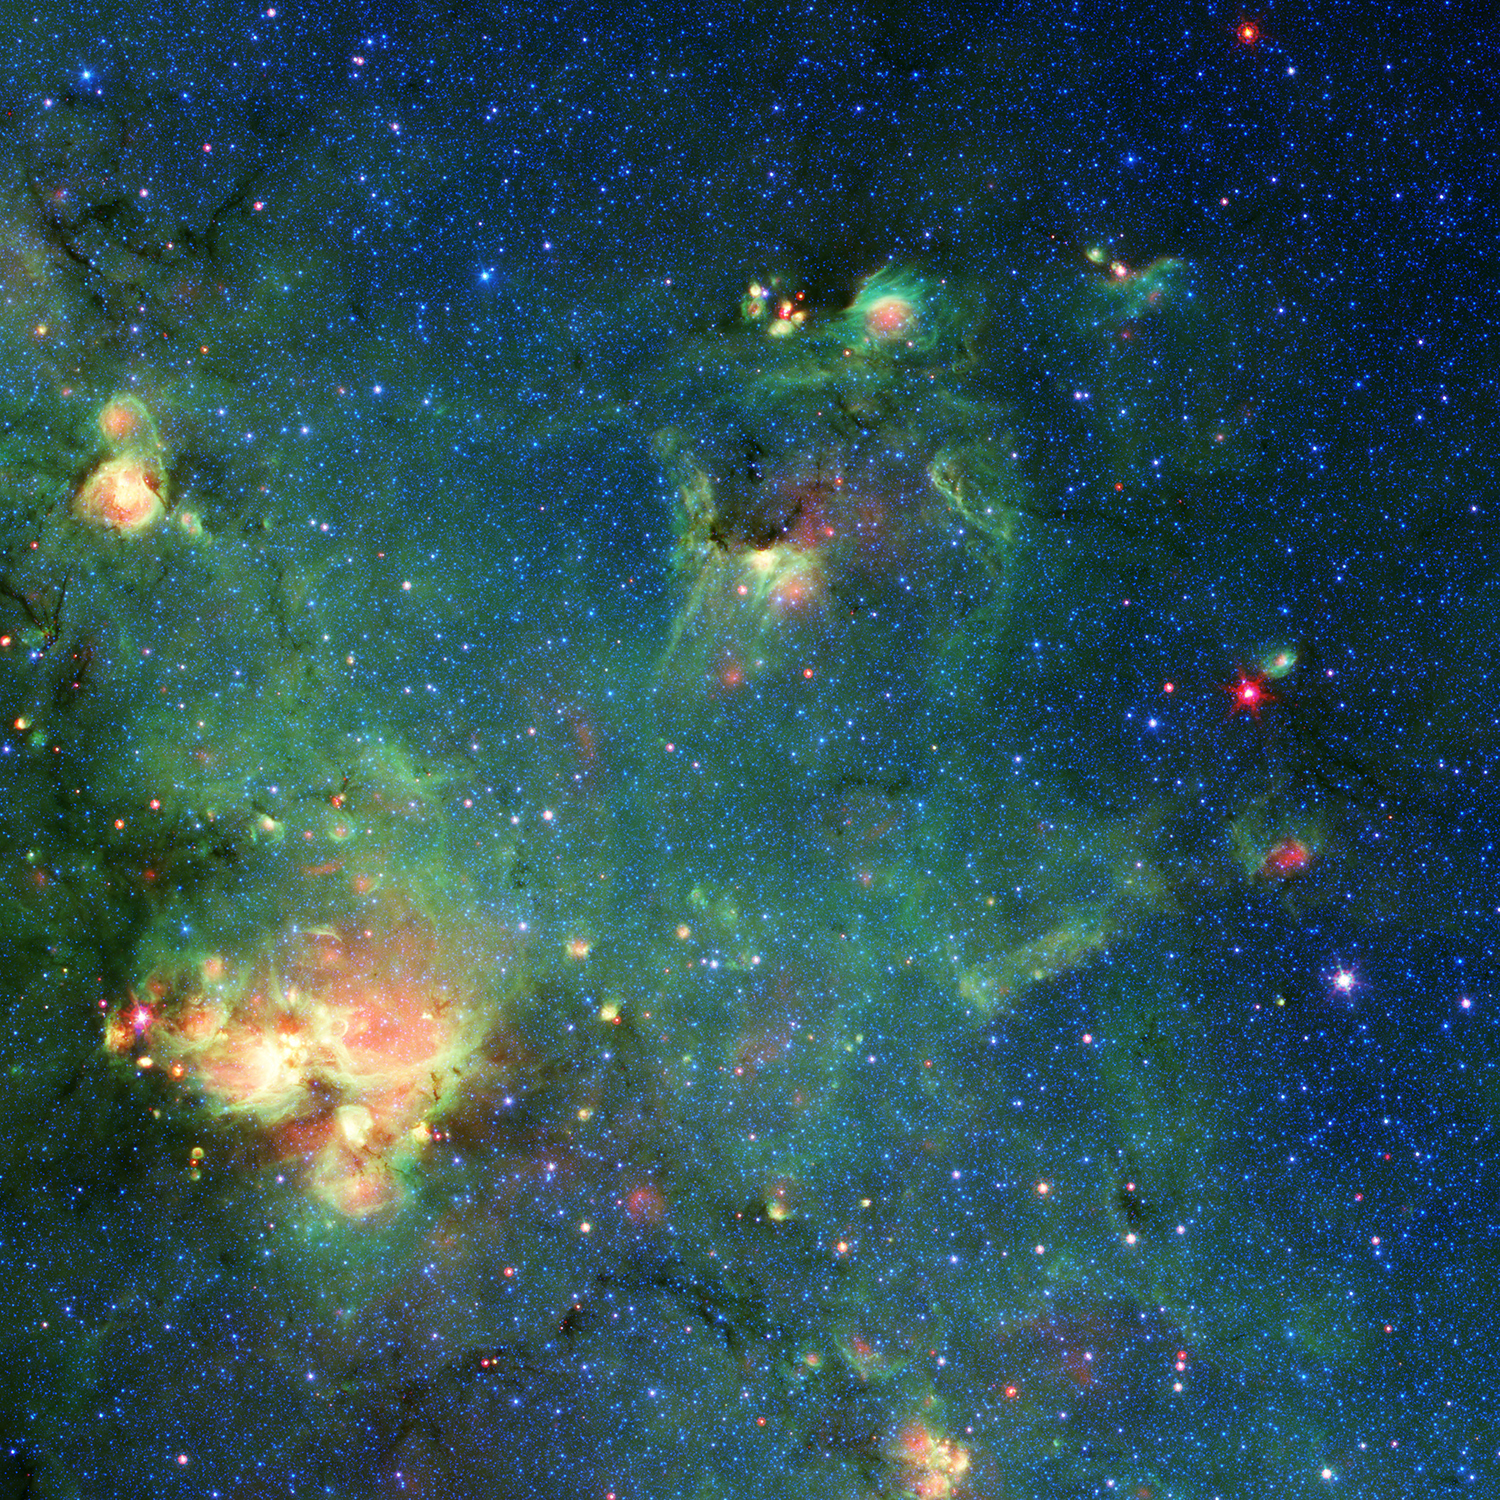 colorful-image-shows-a-nebula-cloud-of-gas-and-dust-in-space.jpg